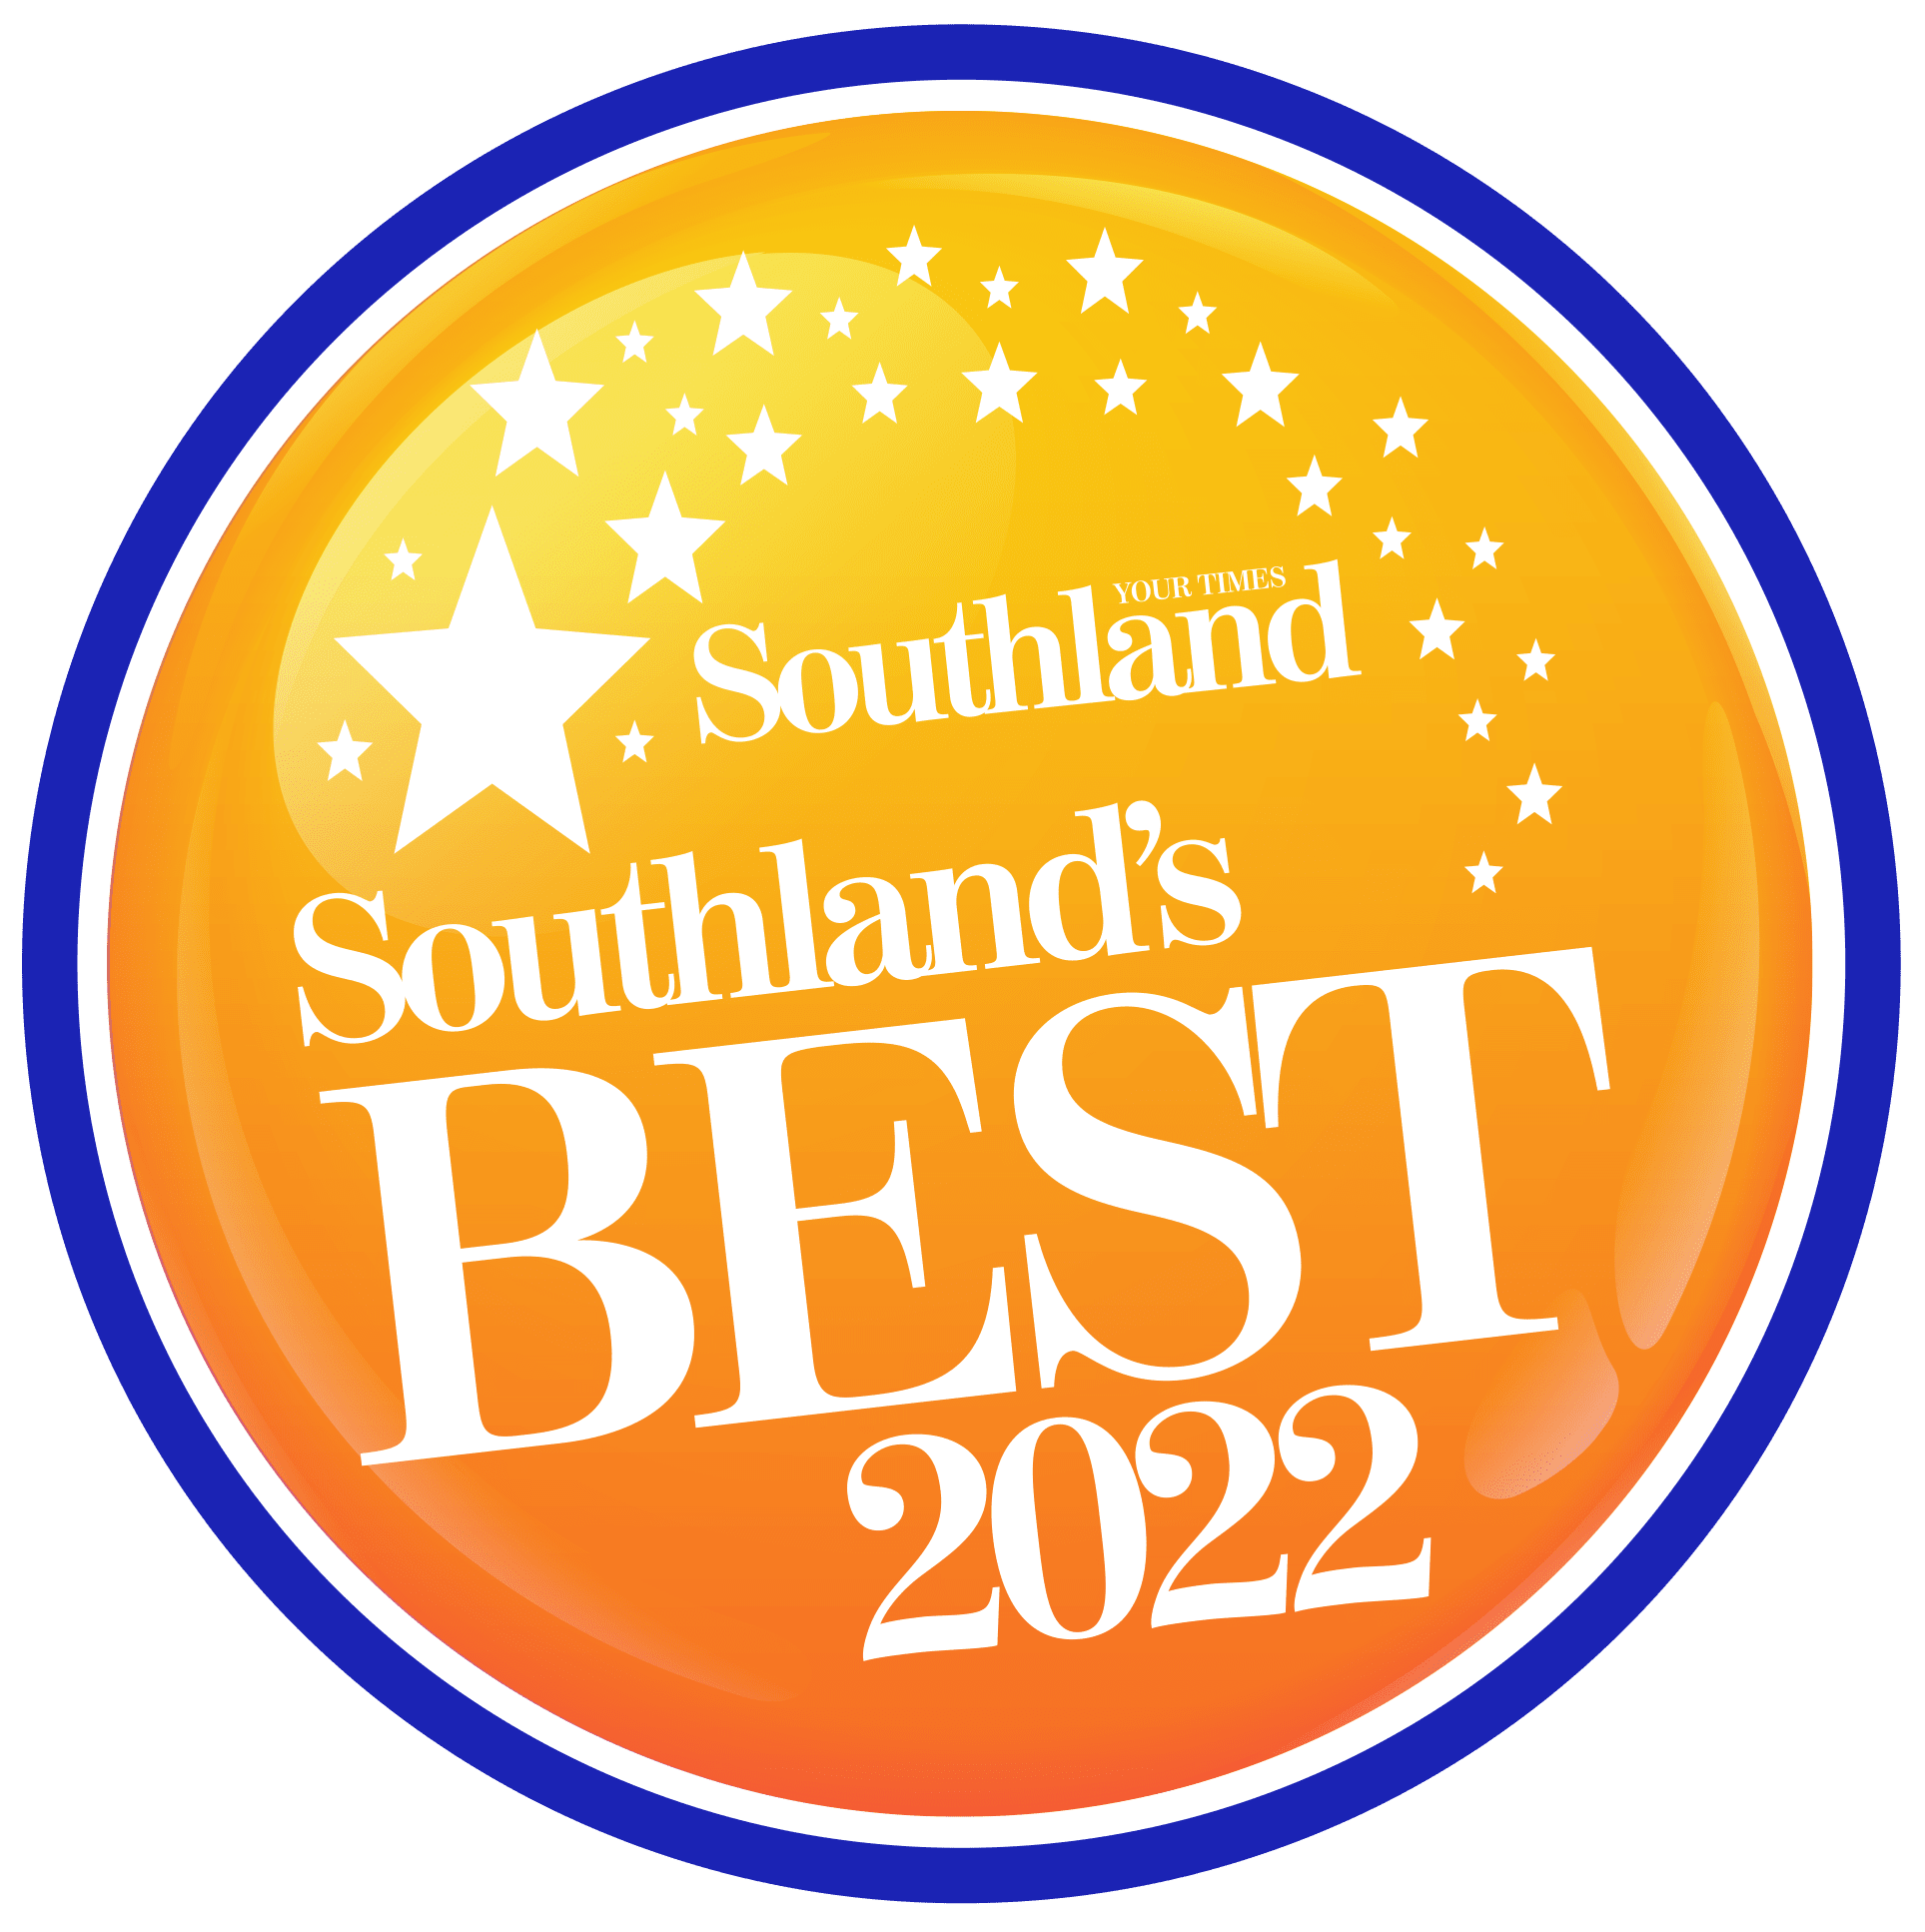 Southland's best 2022